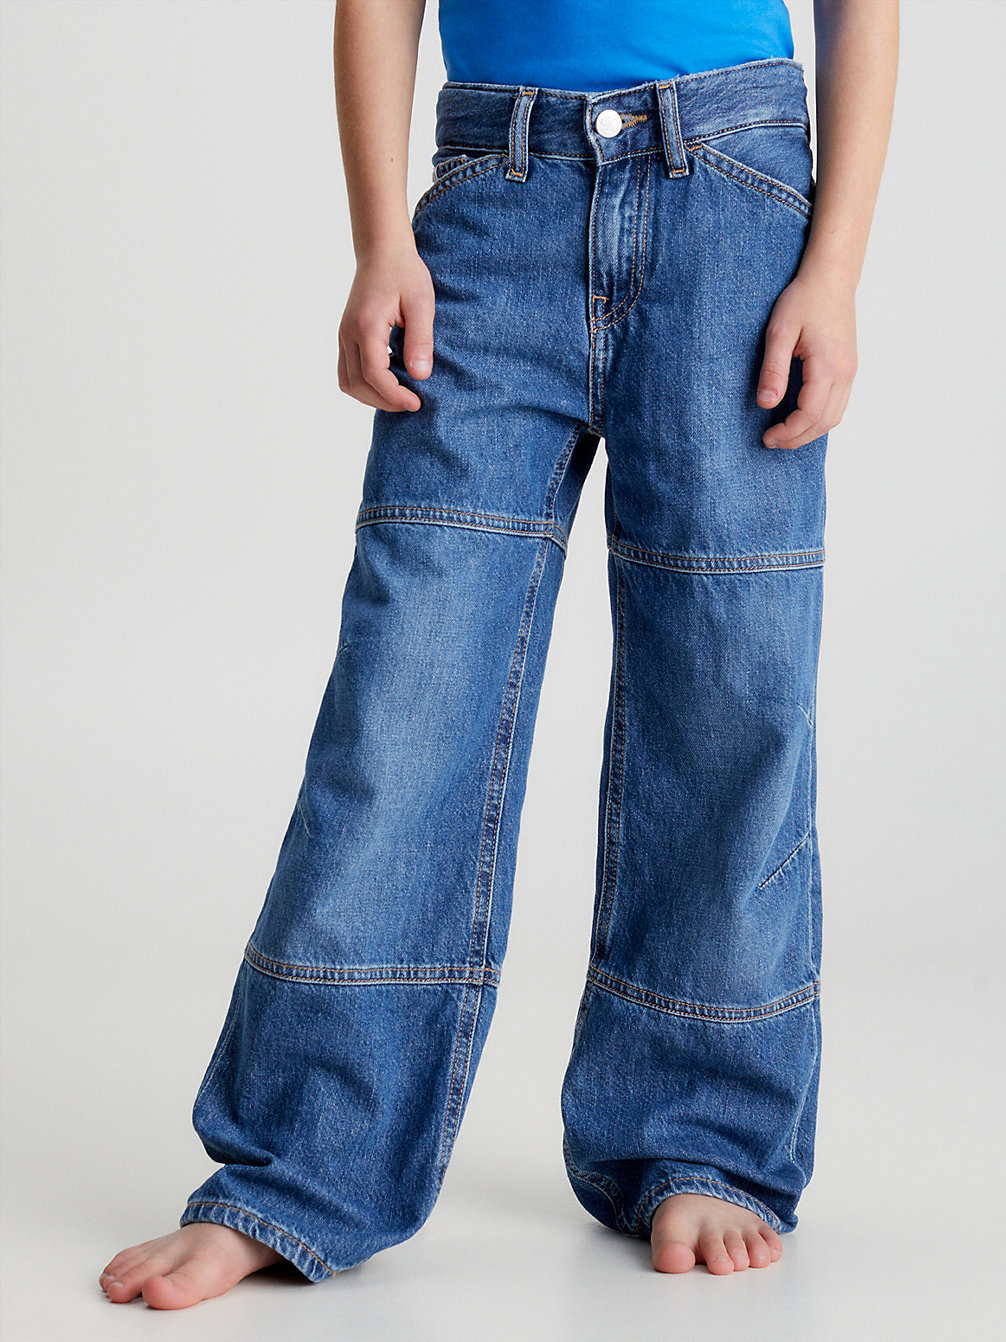 Relaxed Jeans Skater > AUTHENTIC VINTAGE NEW > undefined nino > Calvin Klein